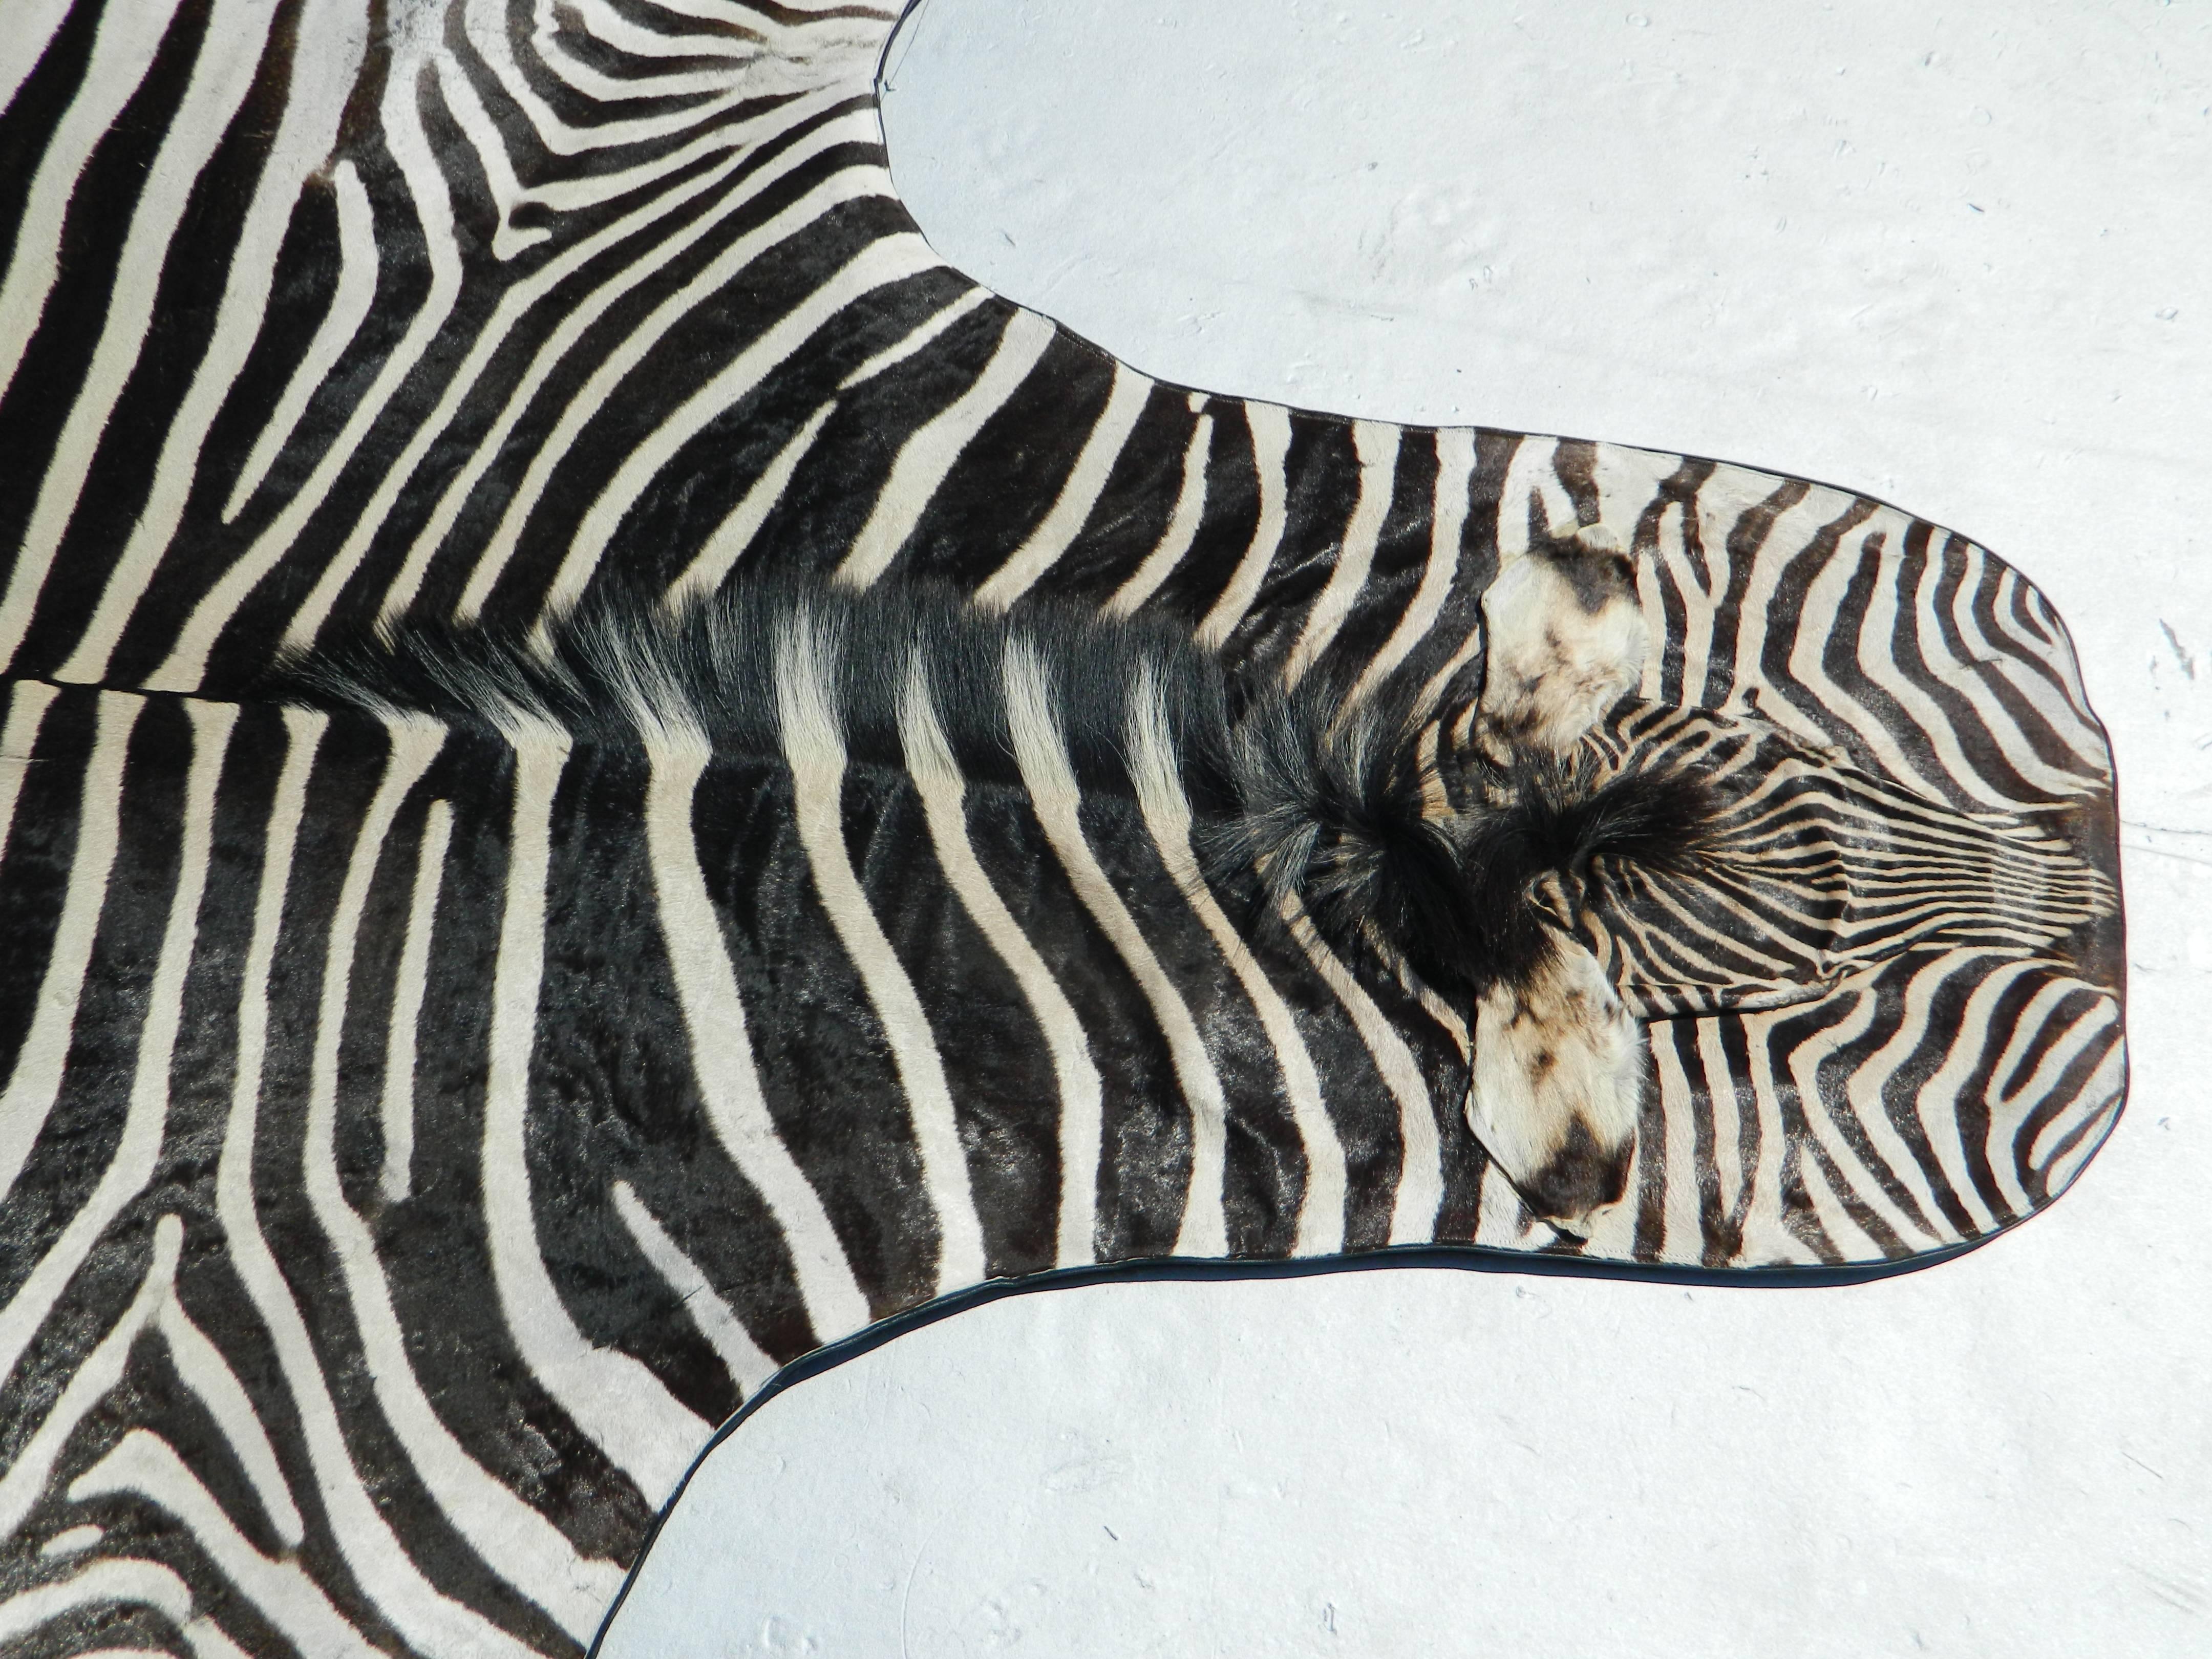 Beautiful grade “A” zebra skin rug lined with canvas and finished with leather trim.
8' Long excluding the tail 
Large selection of hides of different qualities and sizes for rugs and upholstery.
Please contact us for more information.

 